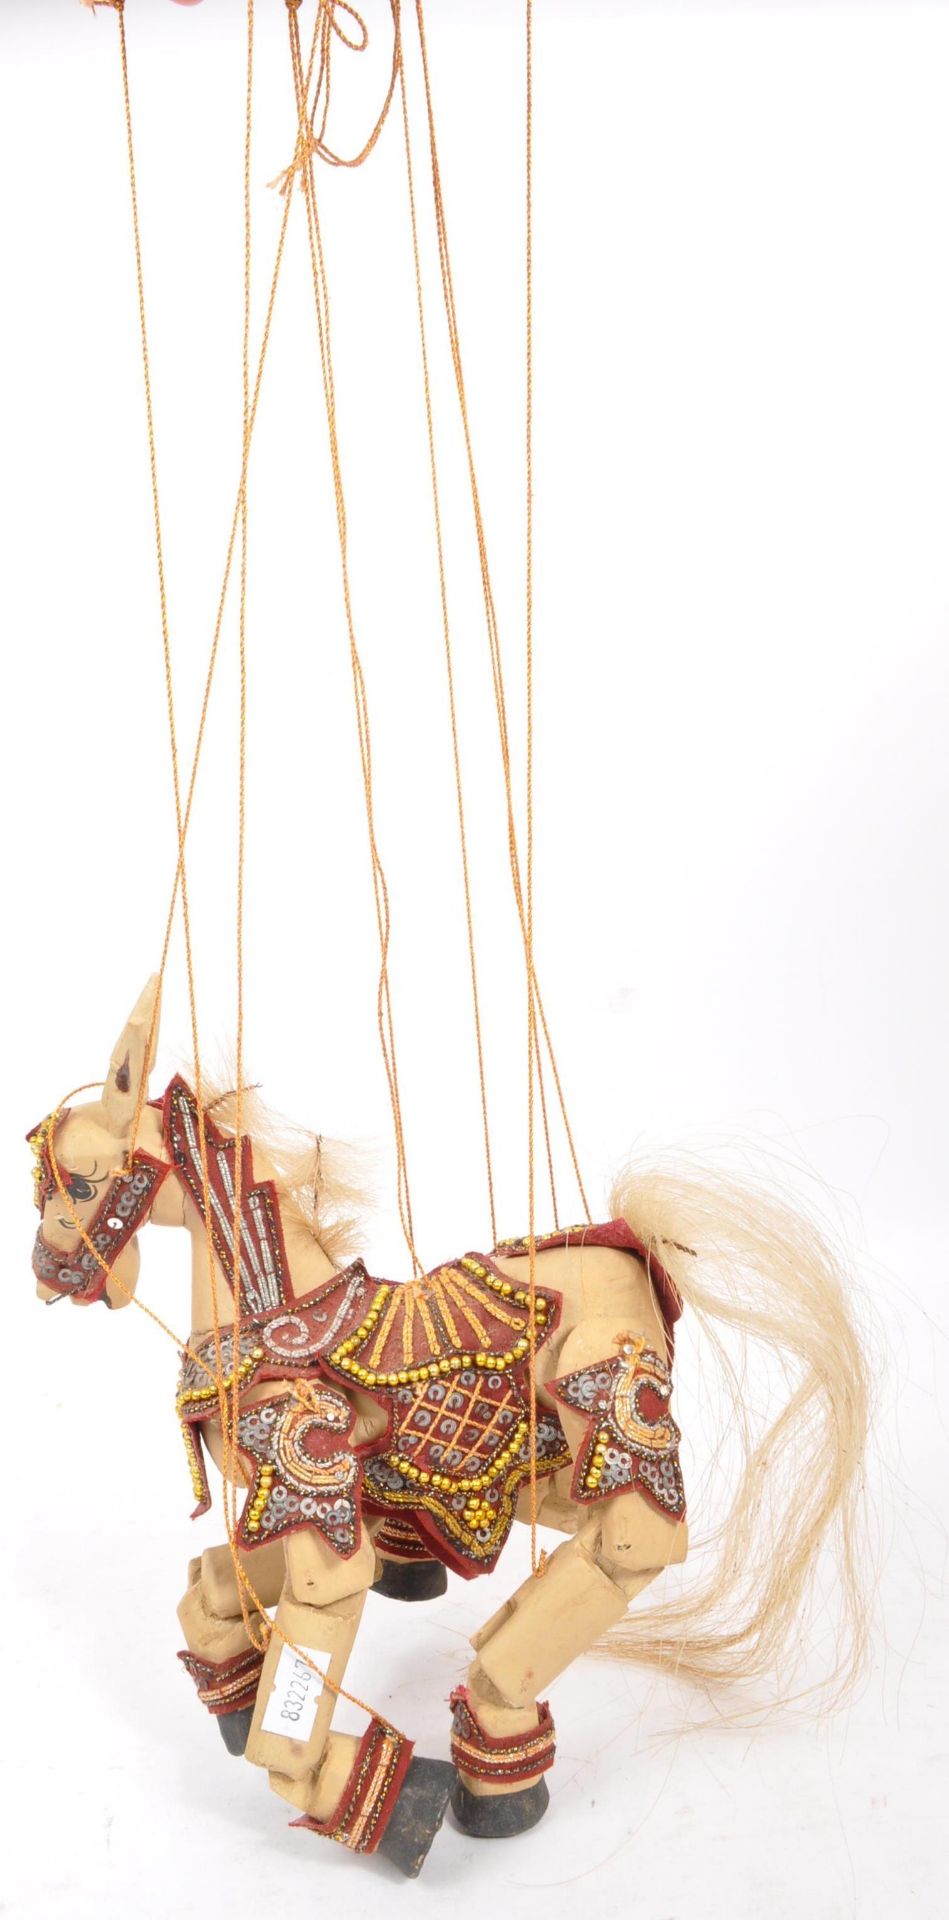 VINTAGE 20TH CENTURY GILT DECORATED HORSE PUPPET